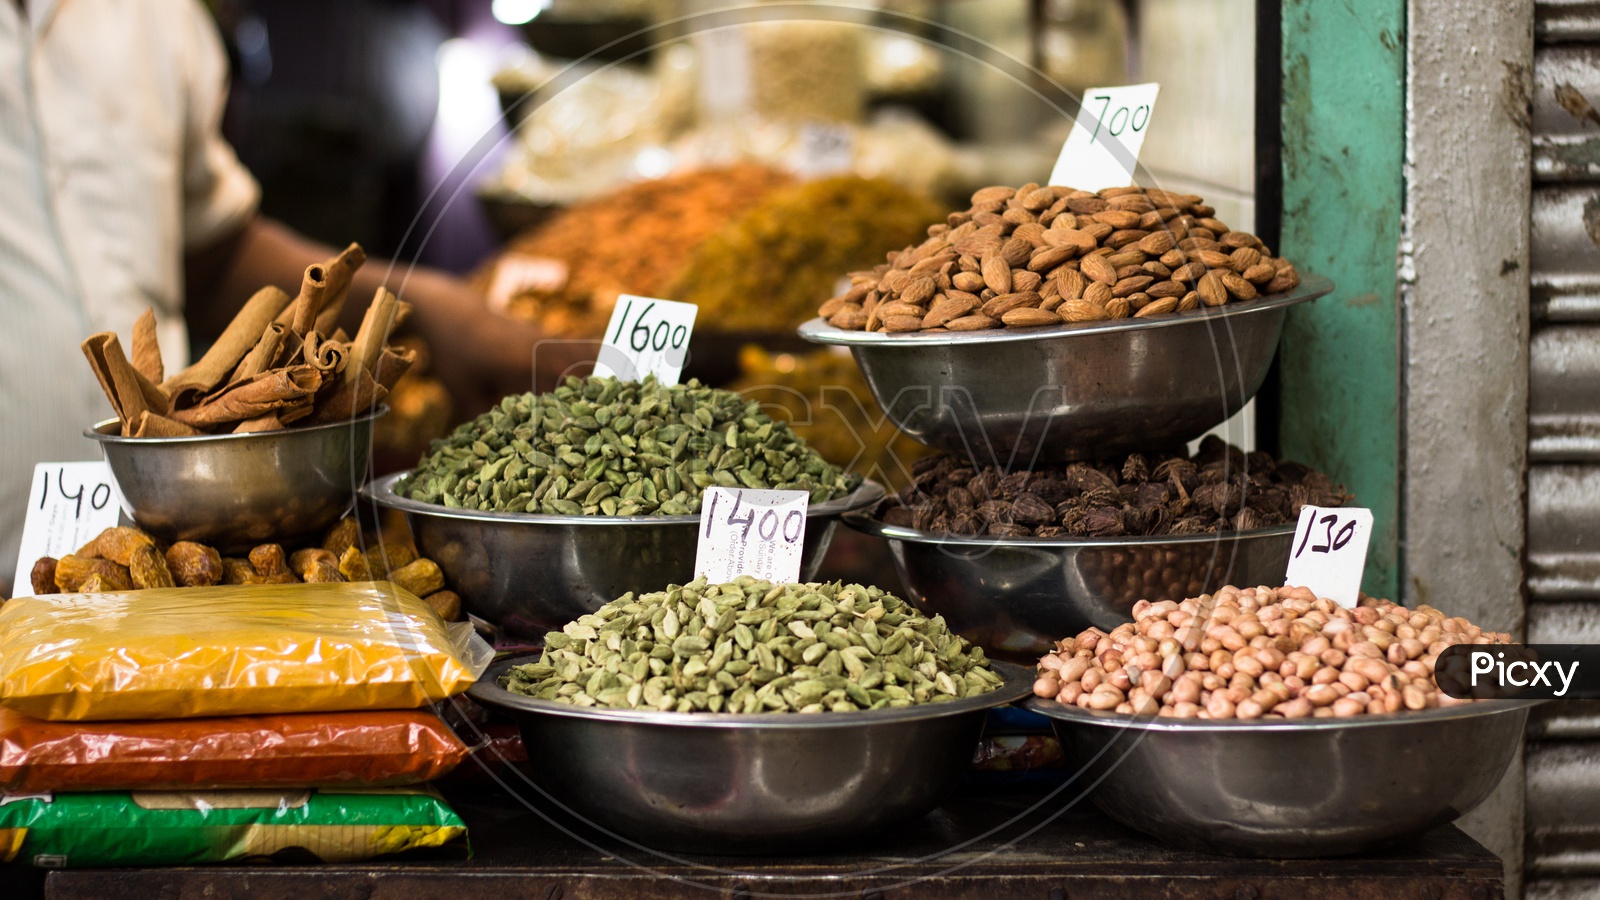 Spices and dry fruits sold at Khari Baoli spice market in Delhi